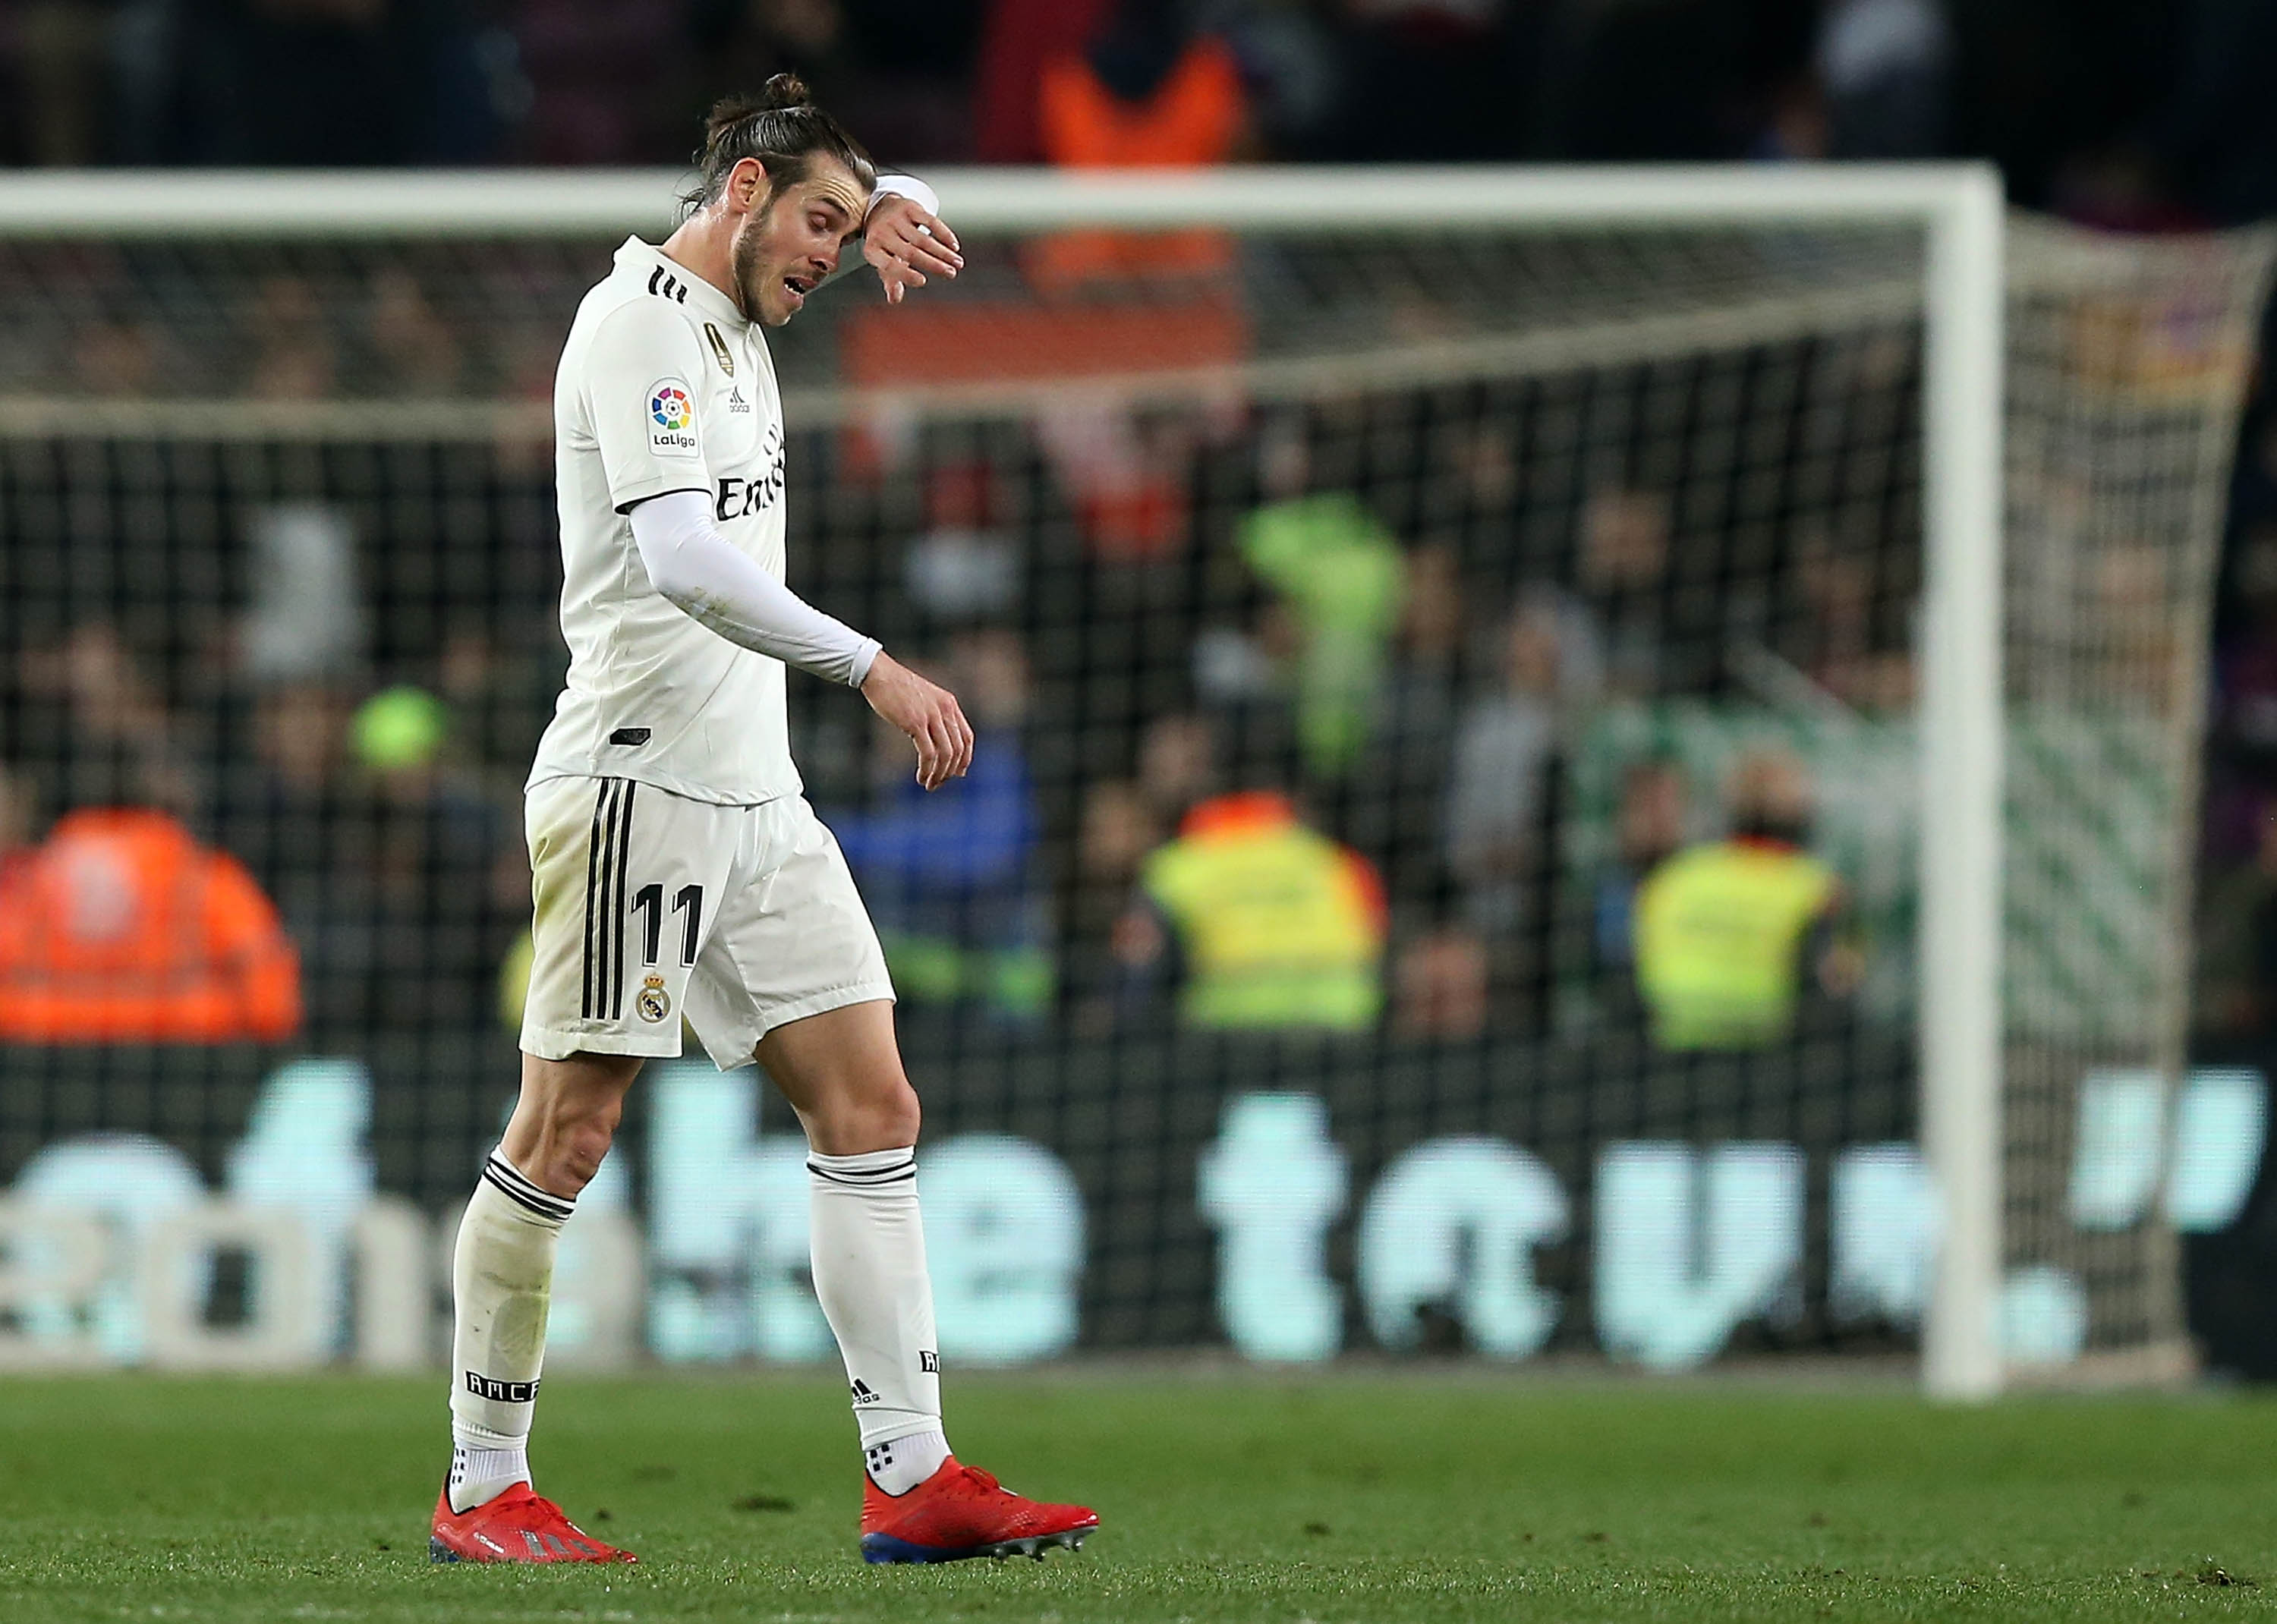 BARCELONA, SPAIN - FEBRUARY 06: Gareth Bale of Real Madrid leaves the pitch at the end of the Copa del Rey Semi Final match between FC Barcelona and Real Madrid at Nou Camp on February 06, 2019 in Barcelona, Spain. (Photo by Angel Martinez/Getty Images)